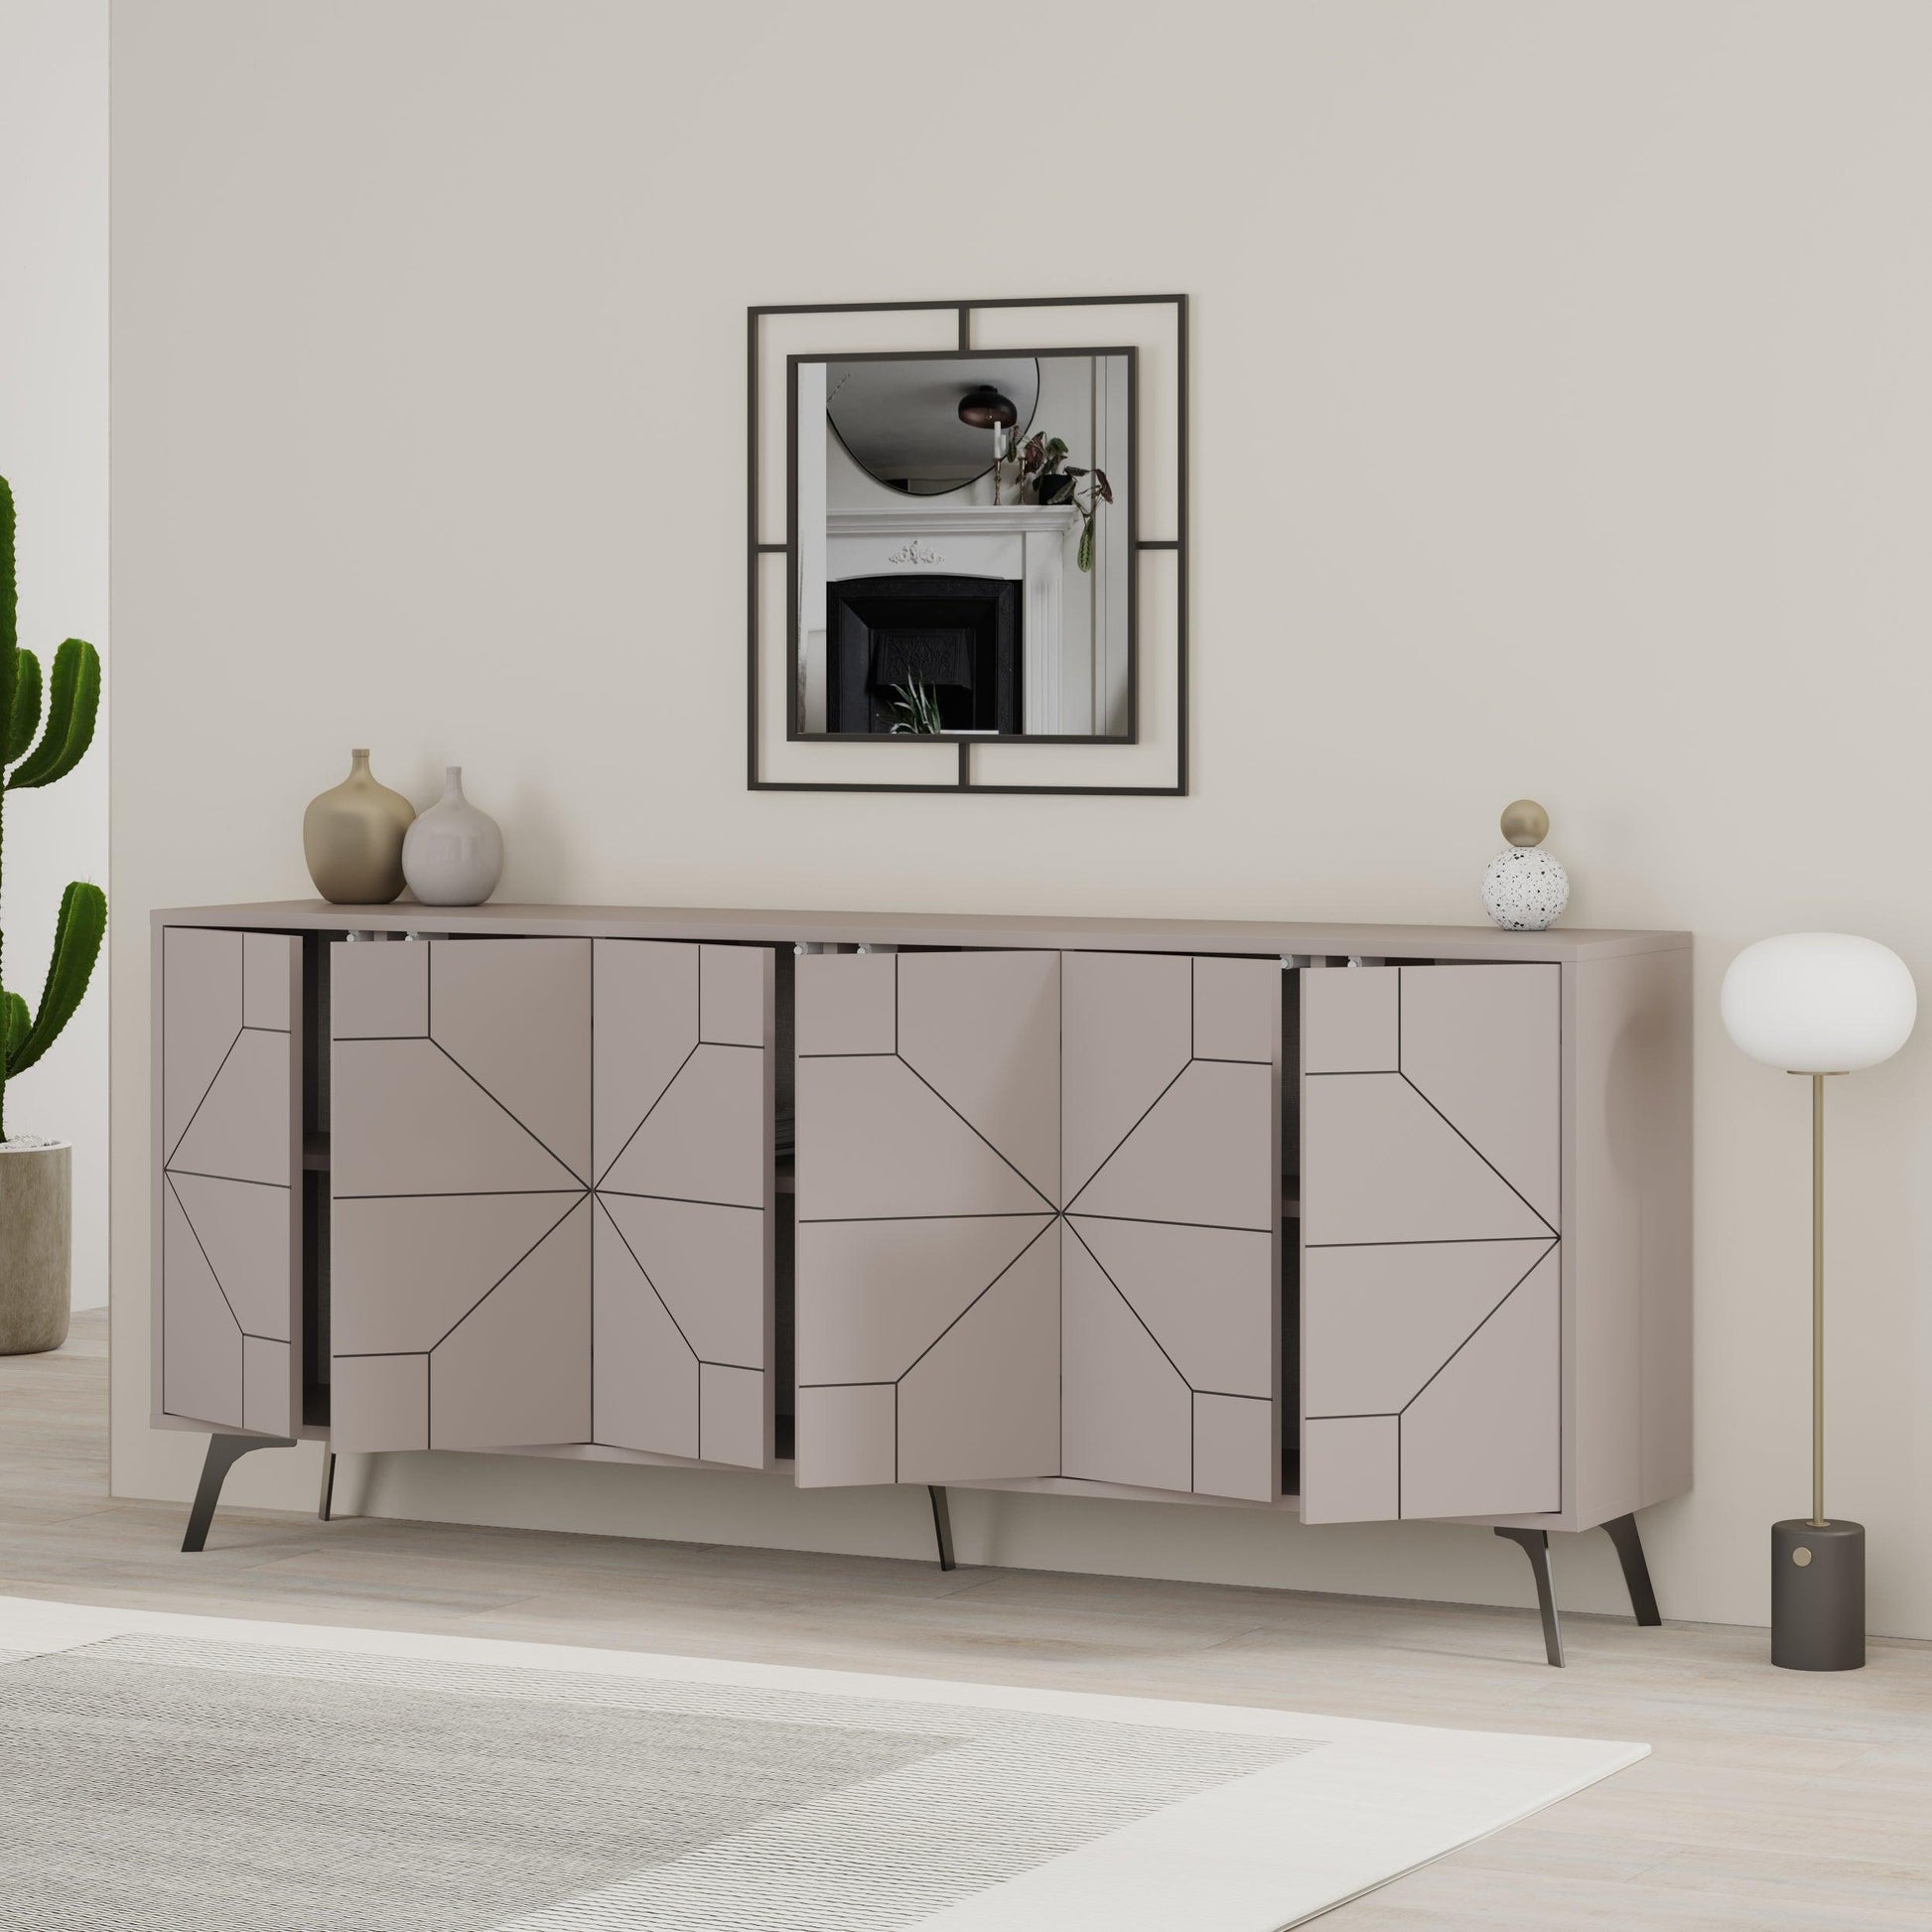 Dune Console Sideboard Display Unit 183cm - Decortie